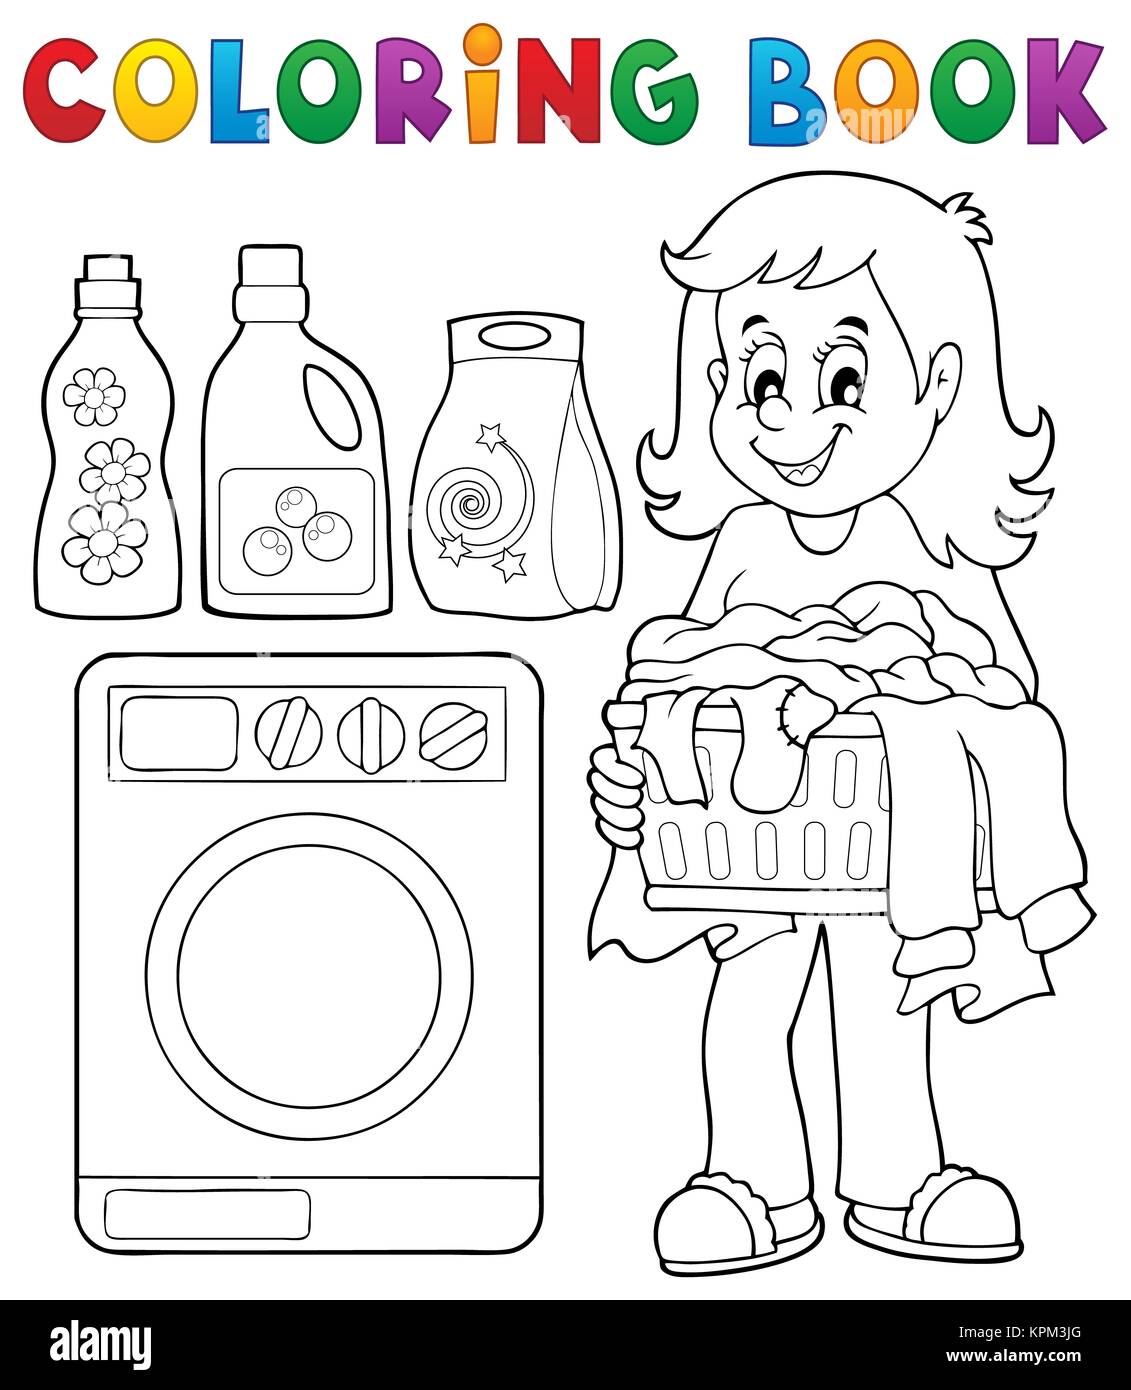 Black And White Vector Illustration Of Kids Activity Coloring Book Page ...